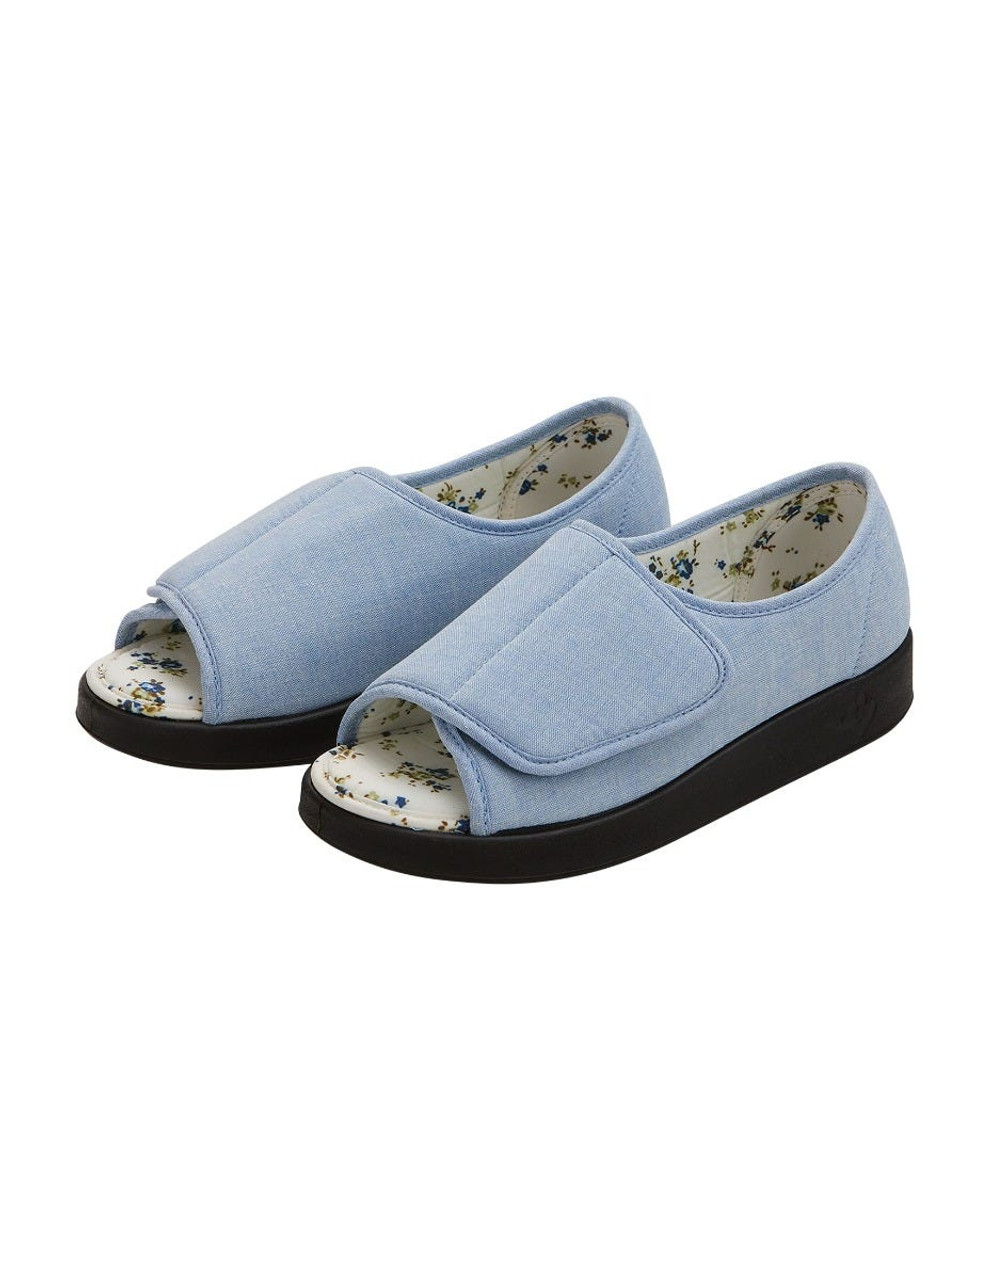 Silverts SV15180 Womens Extra Wide Open Toed Shoes for Indoor & Outdoor  Denim, Size=12, SV15180-SVDEB-12